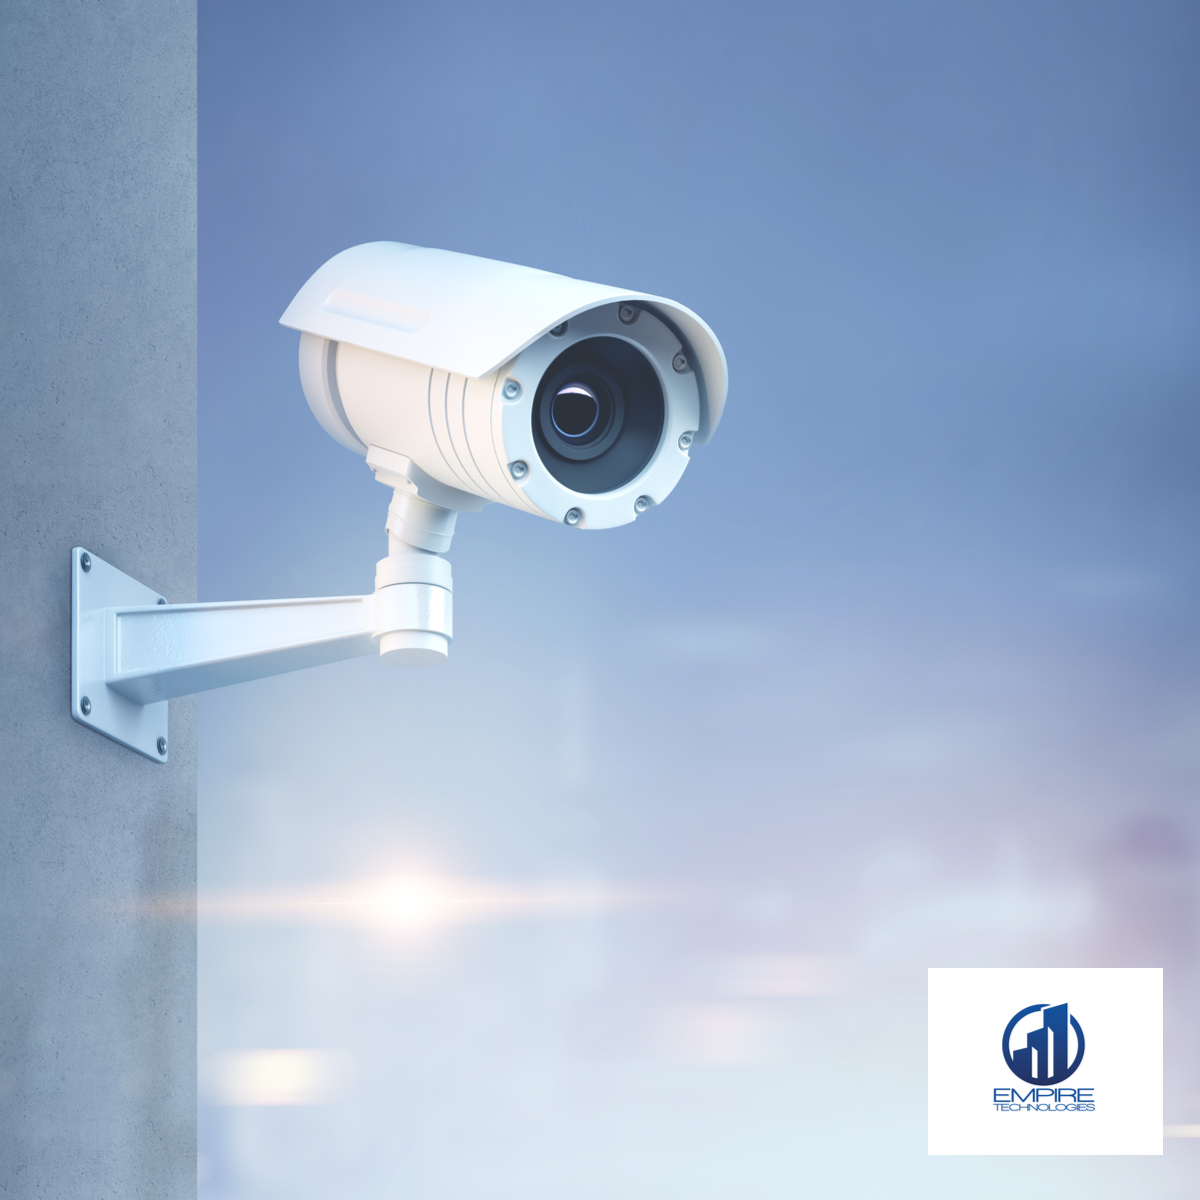 Security Camera Repairs and Preventative Maintenance Ensures the Safety of You and Your Employees!